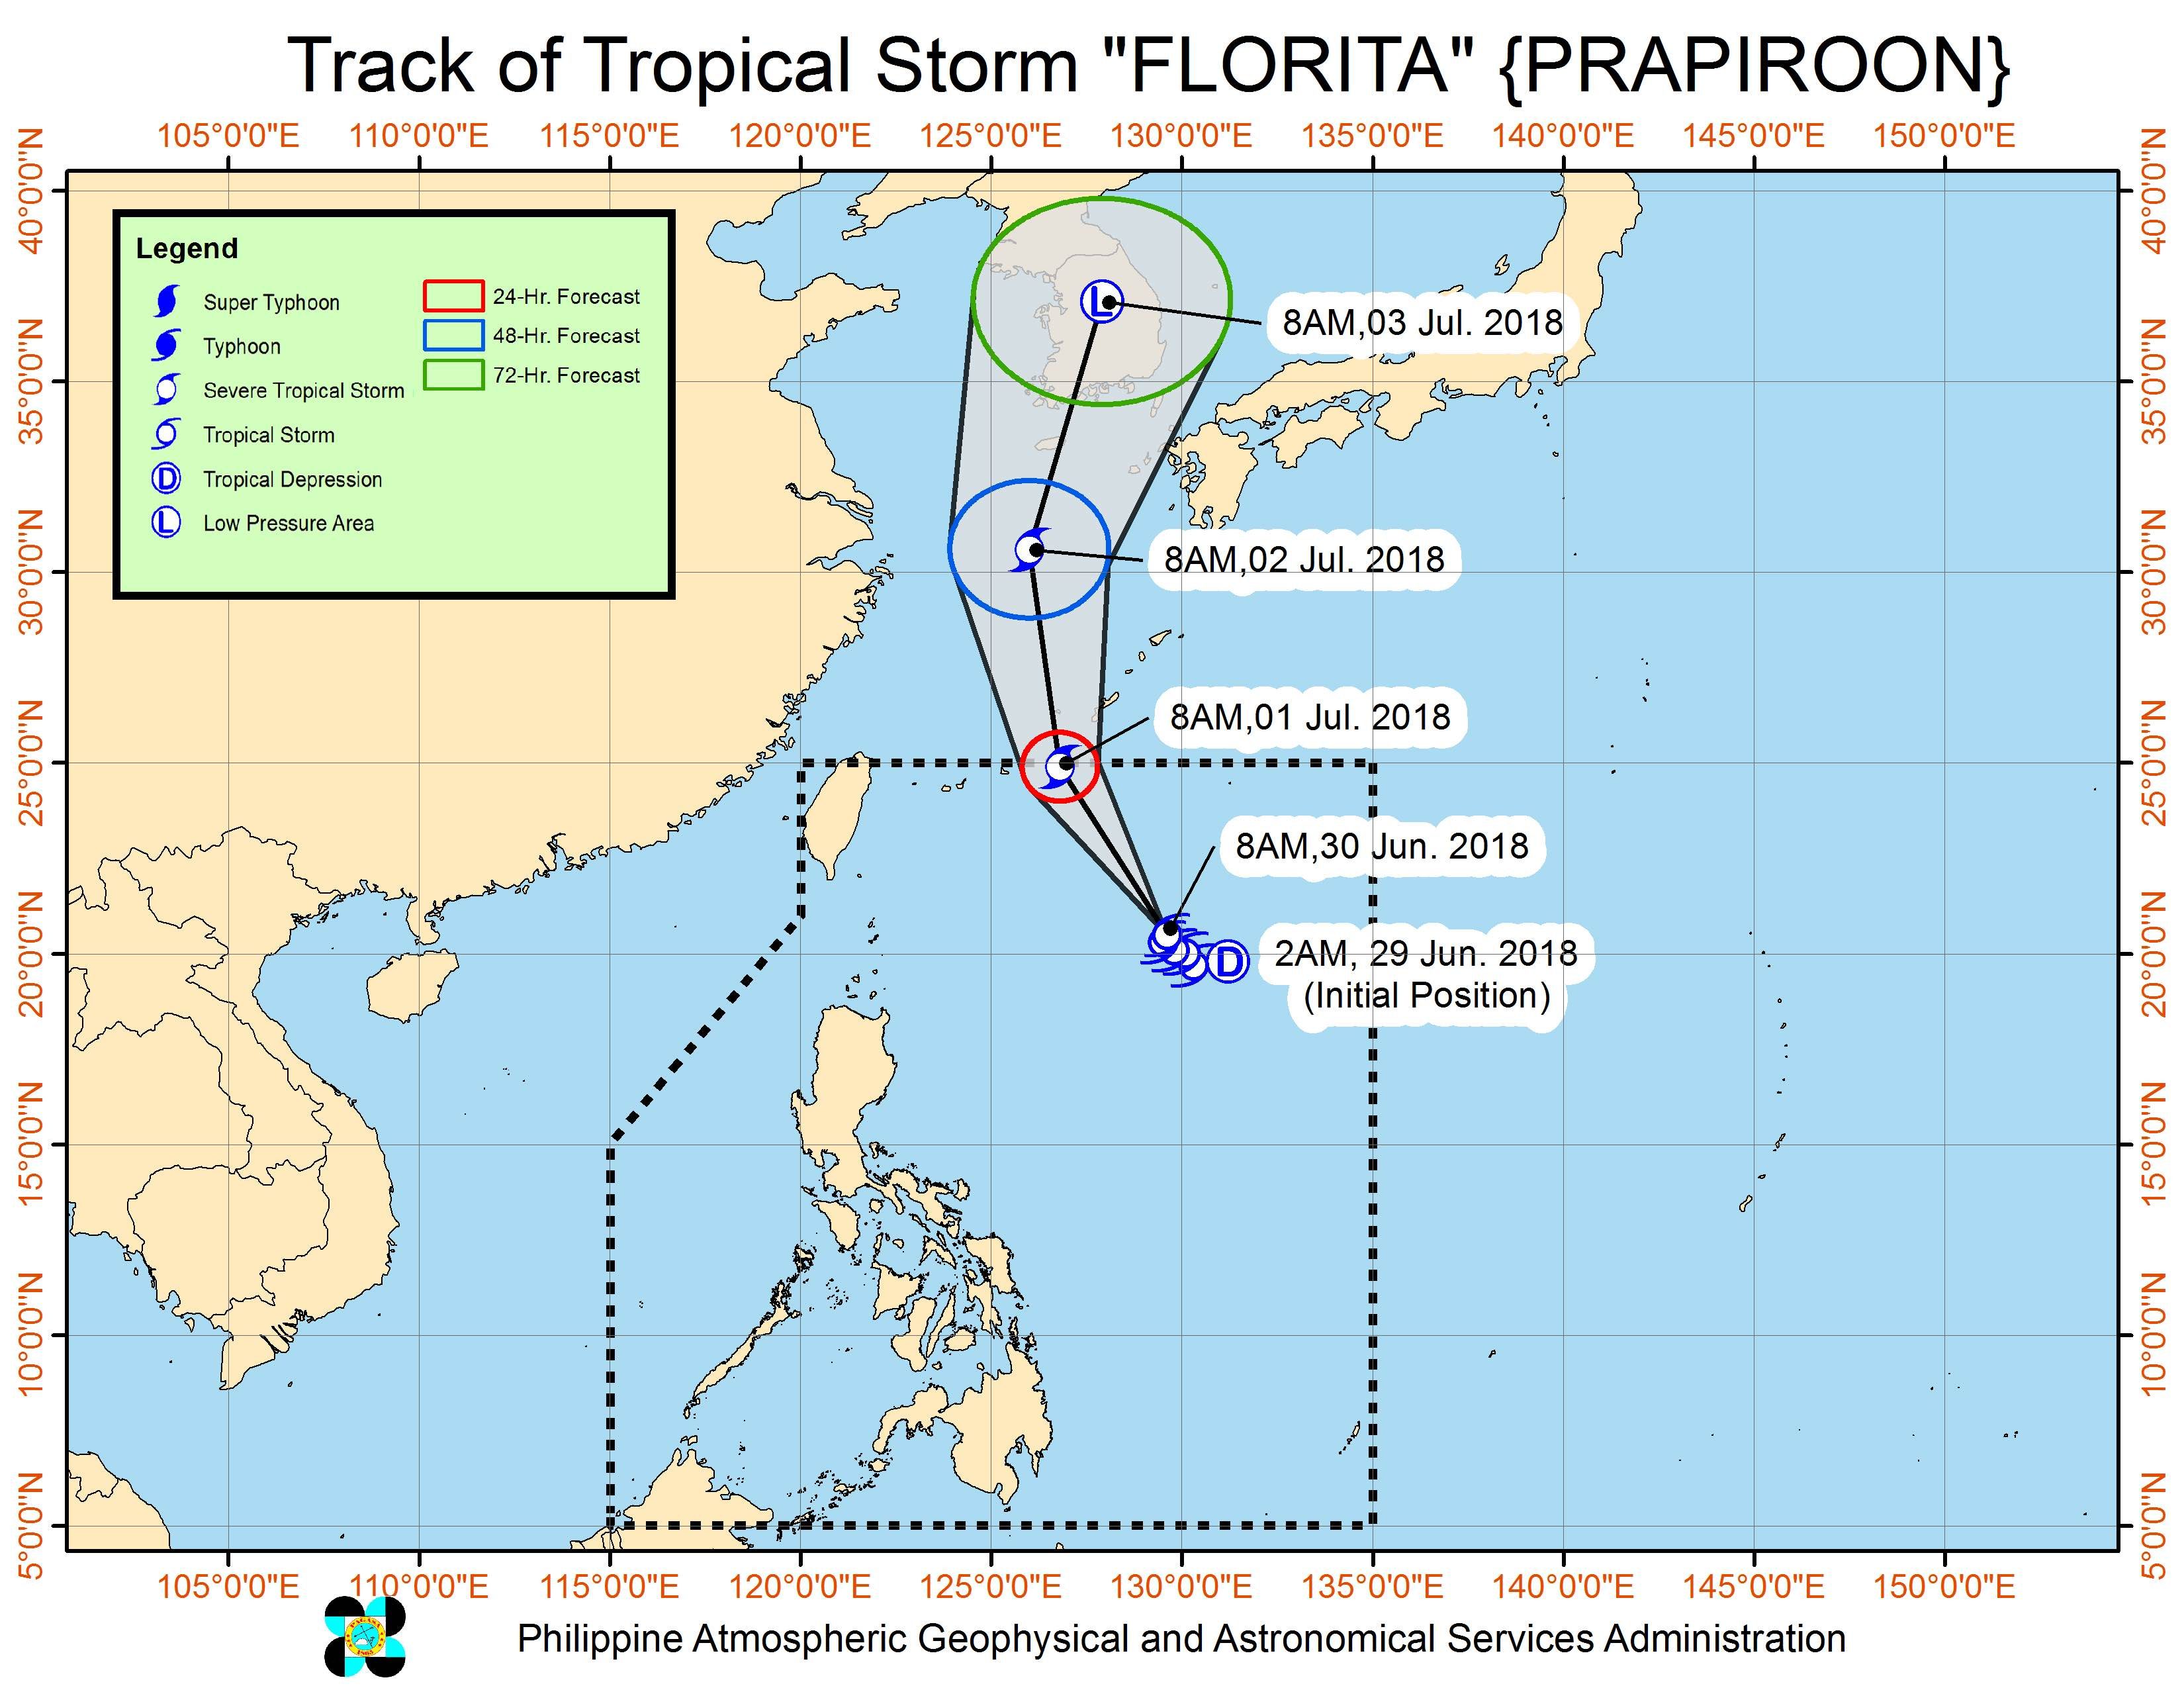 Forecast track of Tropical Storm Florita (Prapiroon) as of June 30, 2018, 11 am. Image courtesy of PAGASA 